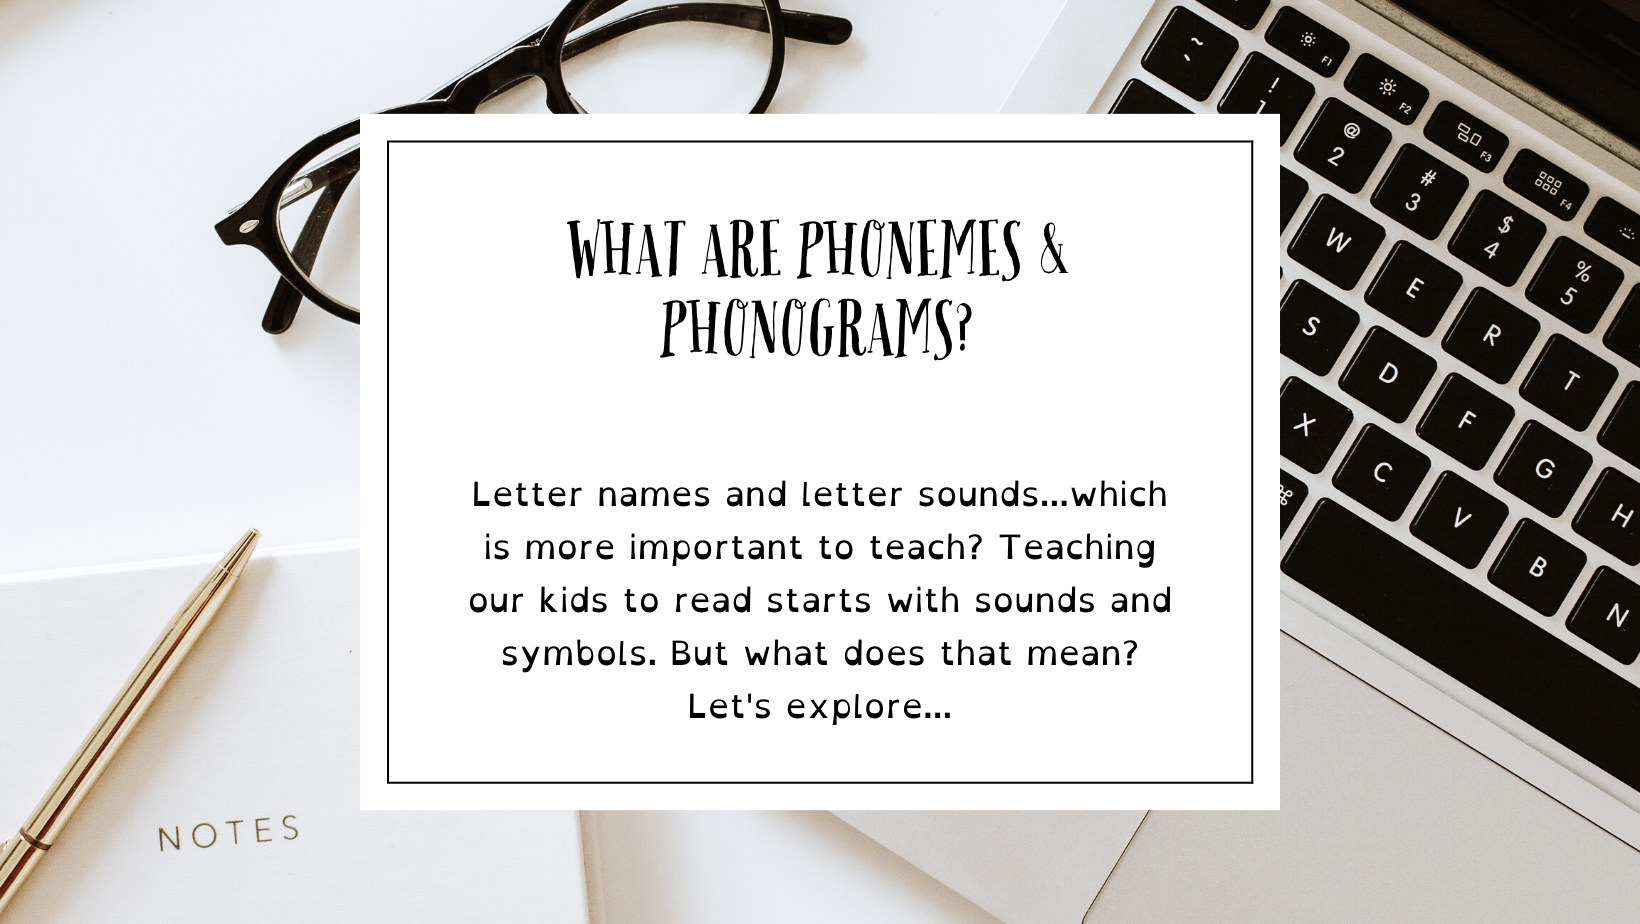 What are phonemes and phonograms? 